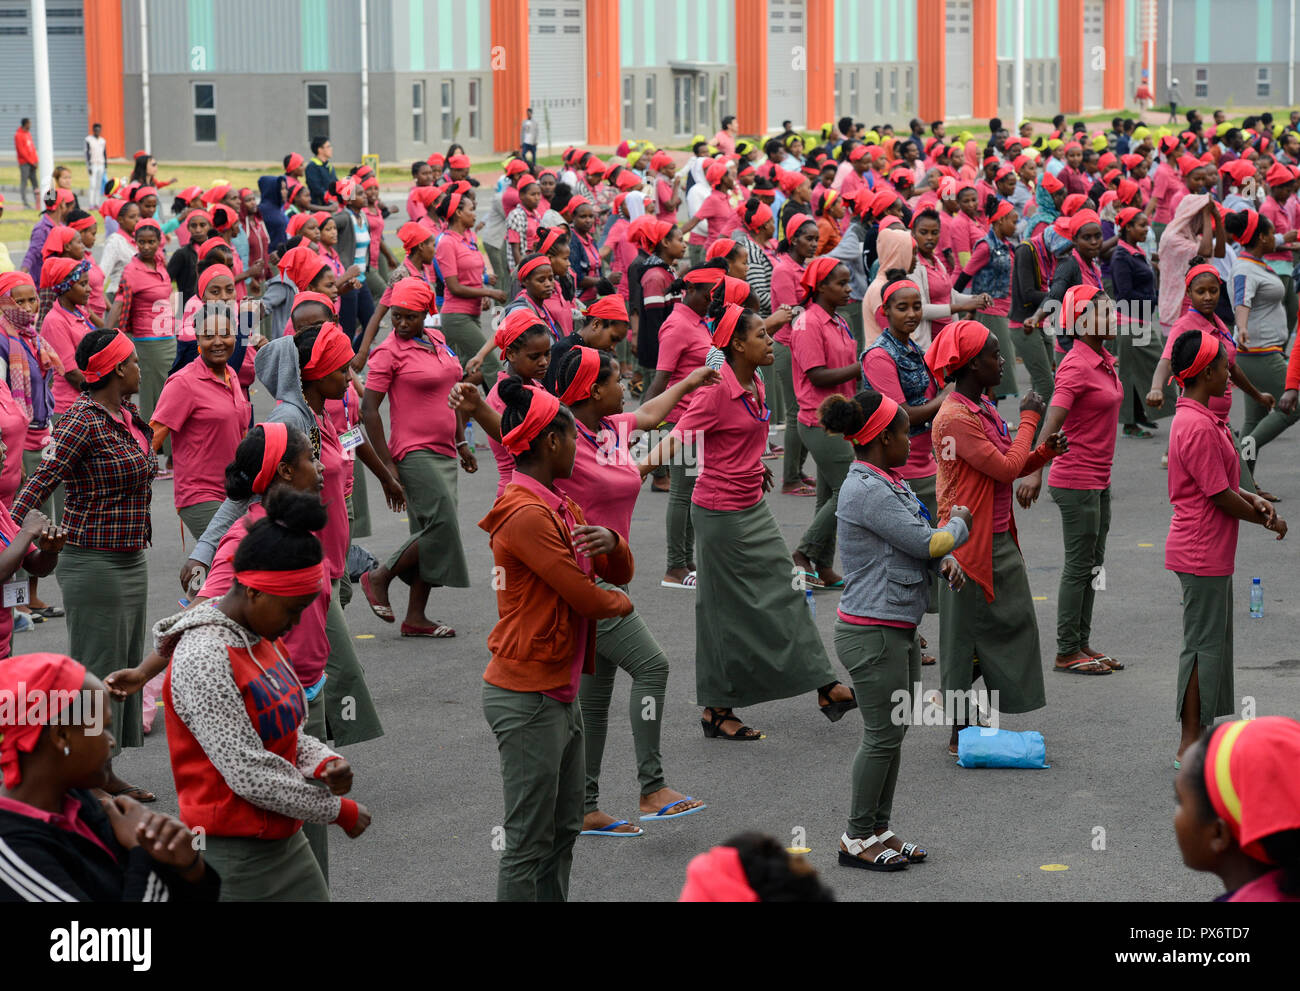 ETHIOPIA , Southern Nations, Hawassa or Awasa, Hawassa Industrial Park, chinese-built for the ethiopian government to attract foreign investors with low rent and tax free to establish a textile industry and create thousands of new jobs, taiwanese company Everest Textile Co. Ltd., women worker do a 15 minutes morning sports before work as motivation training Stock Photo